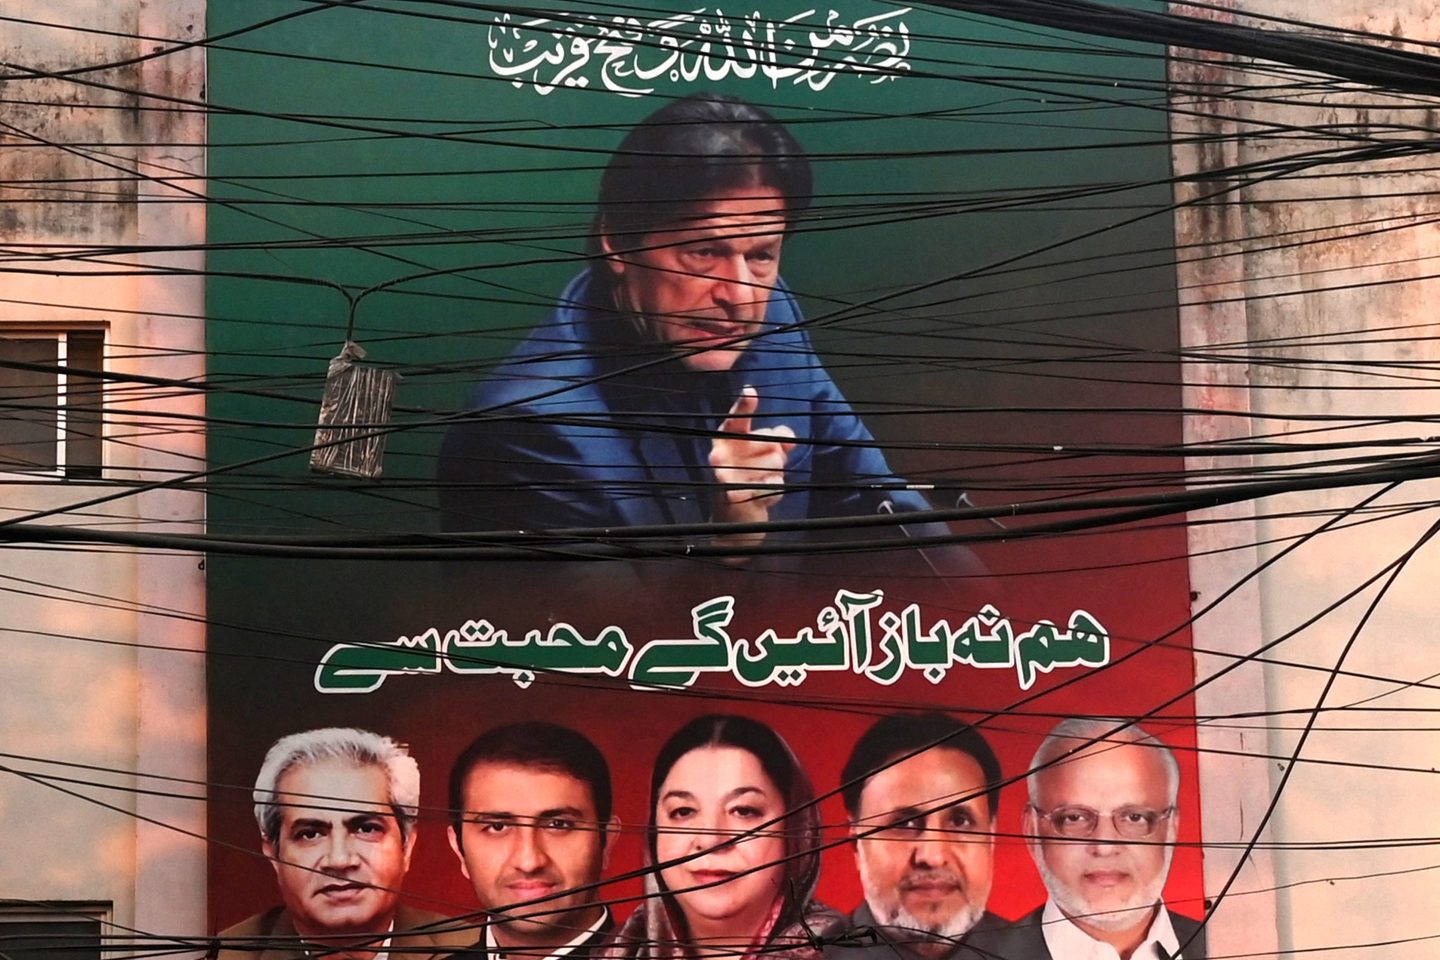 A campaign poster for Pakistan's former Prime Minister, Imran Khan.